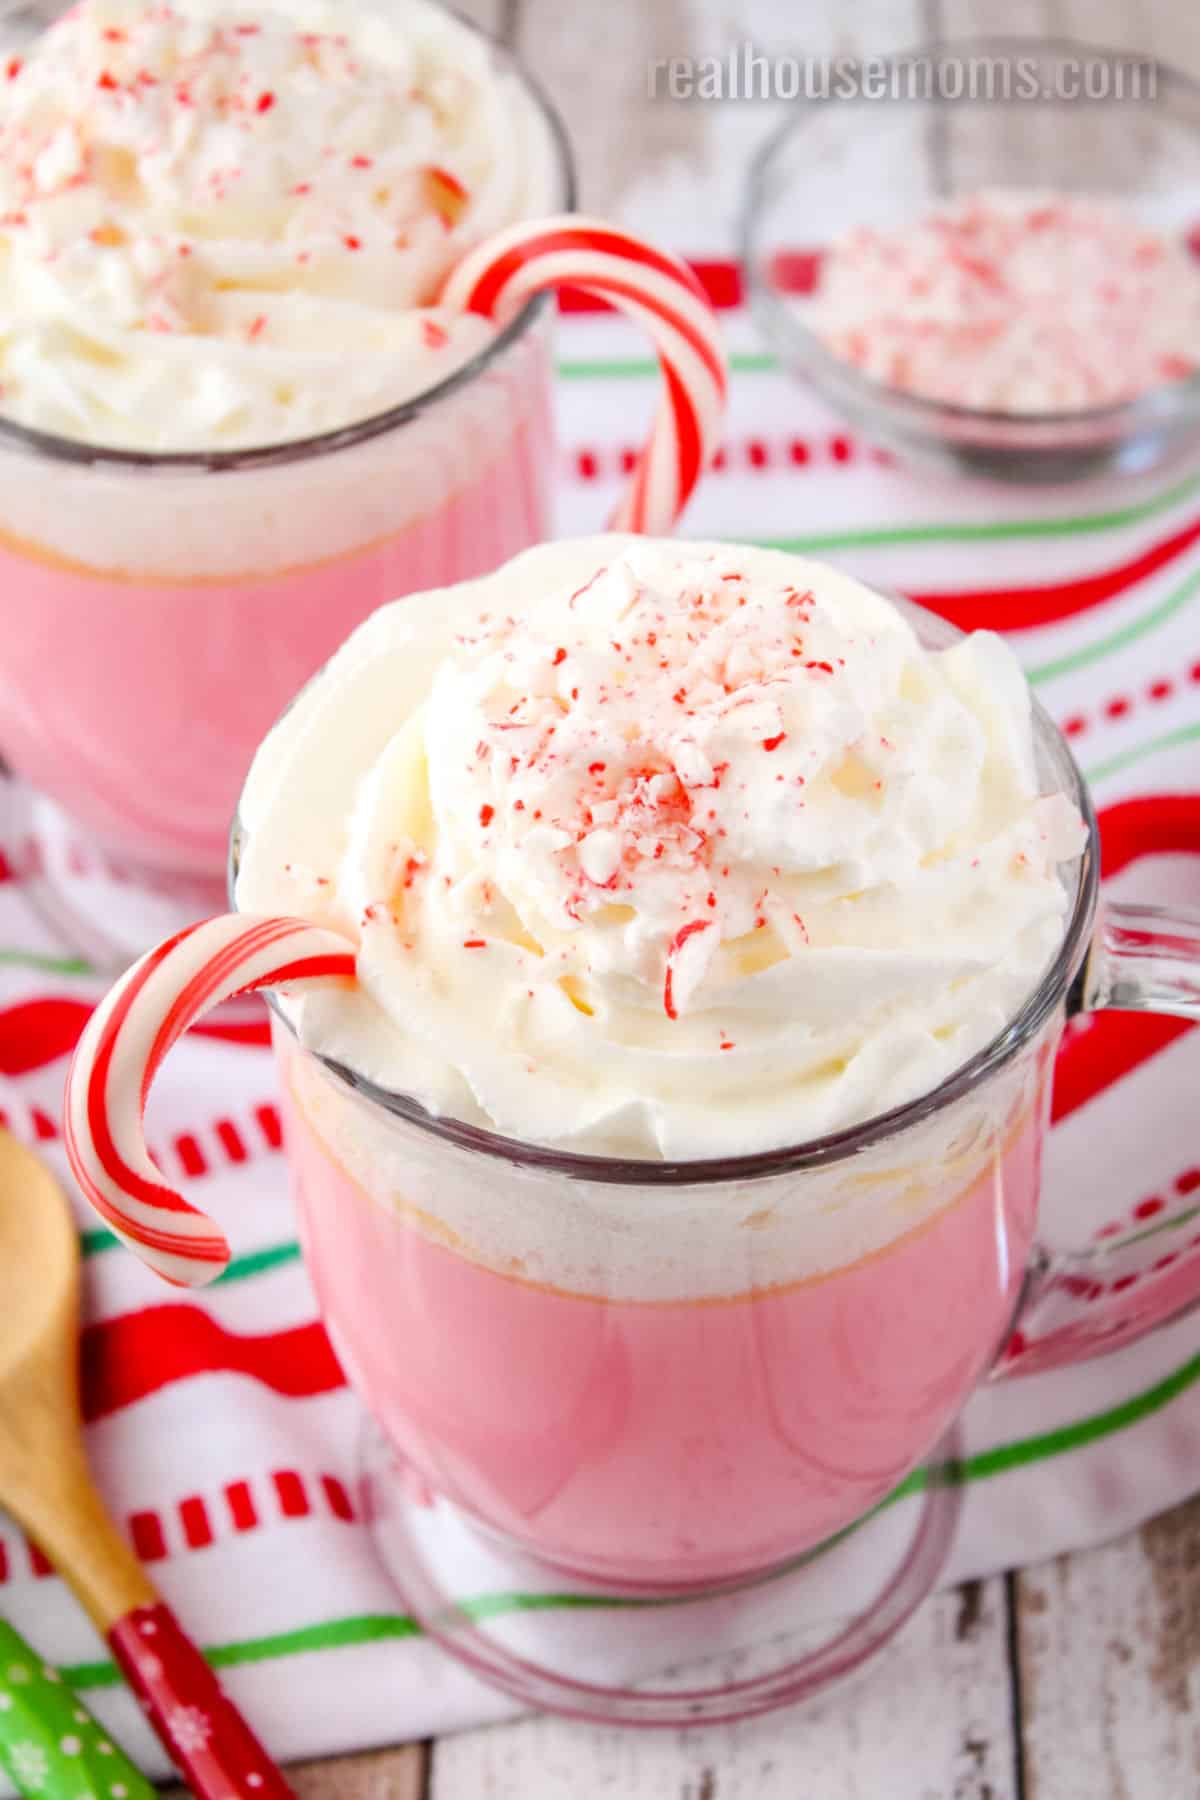 https://realhousemoms.com/wp-content/uploads/Slow-Cooker-Candy-Cane-White-Hot-Chocolate-IC-6.jpg